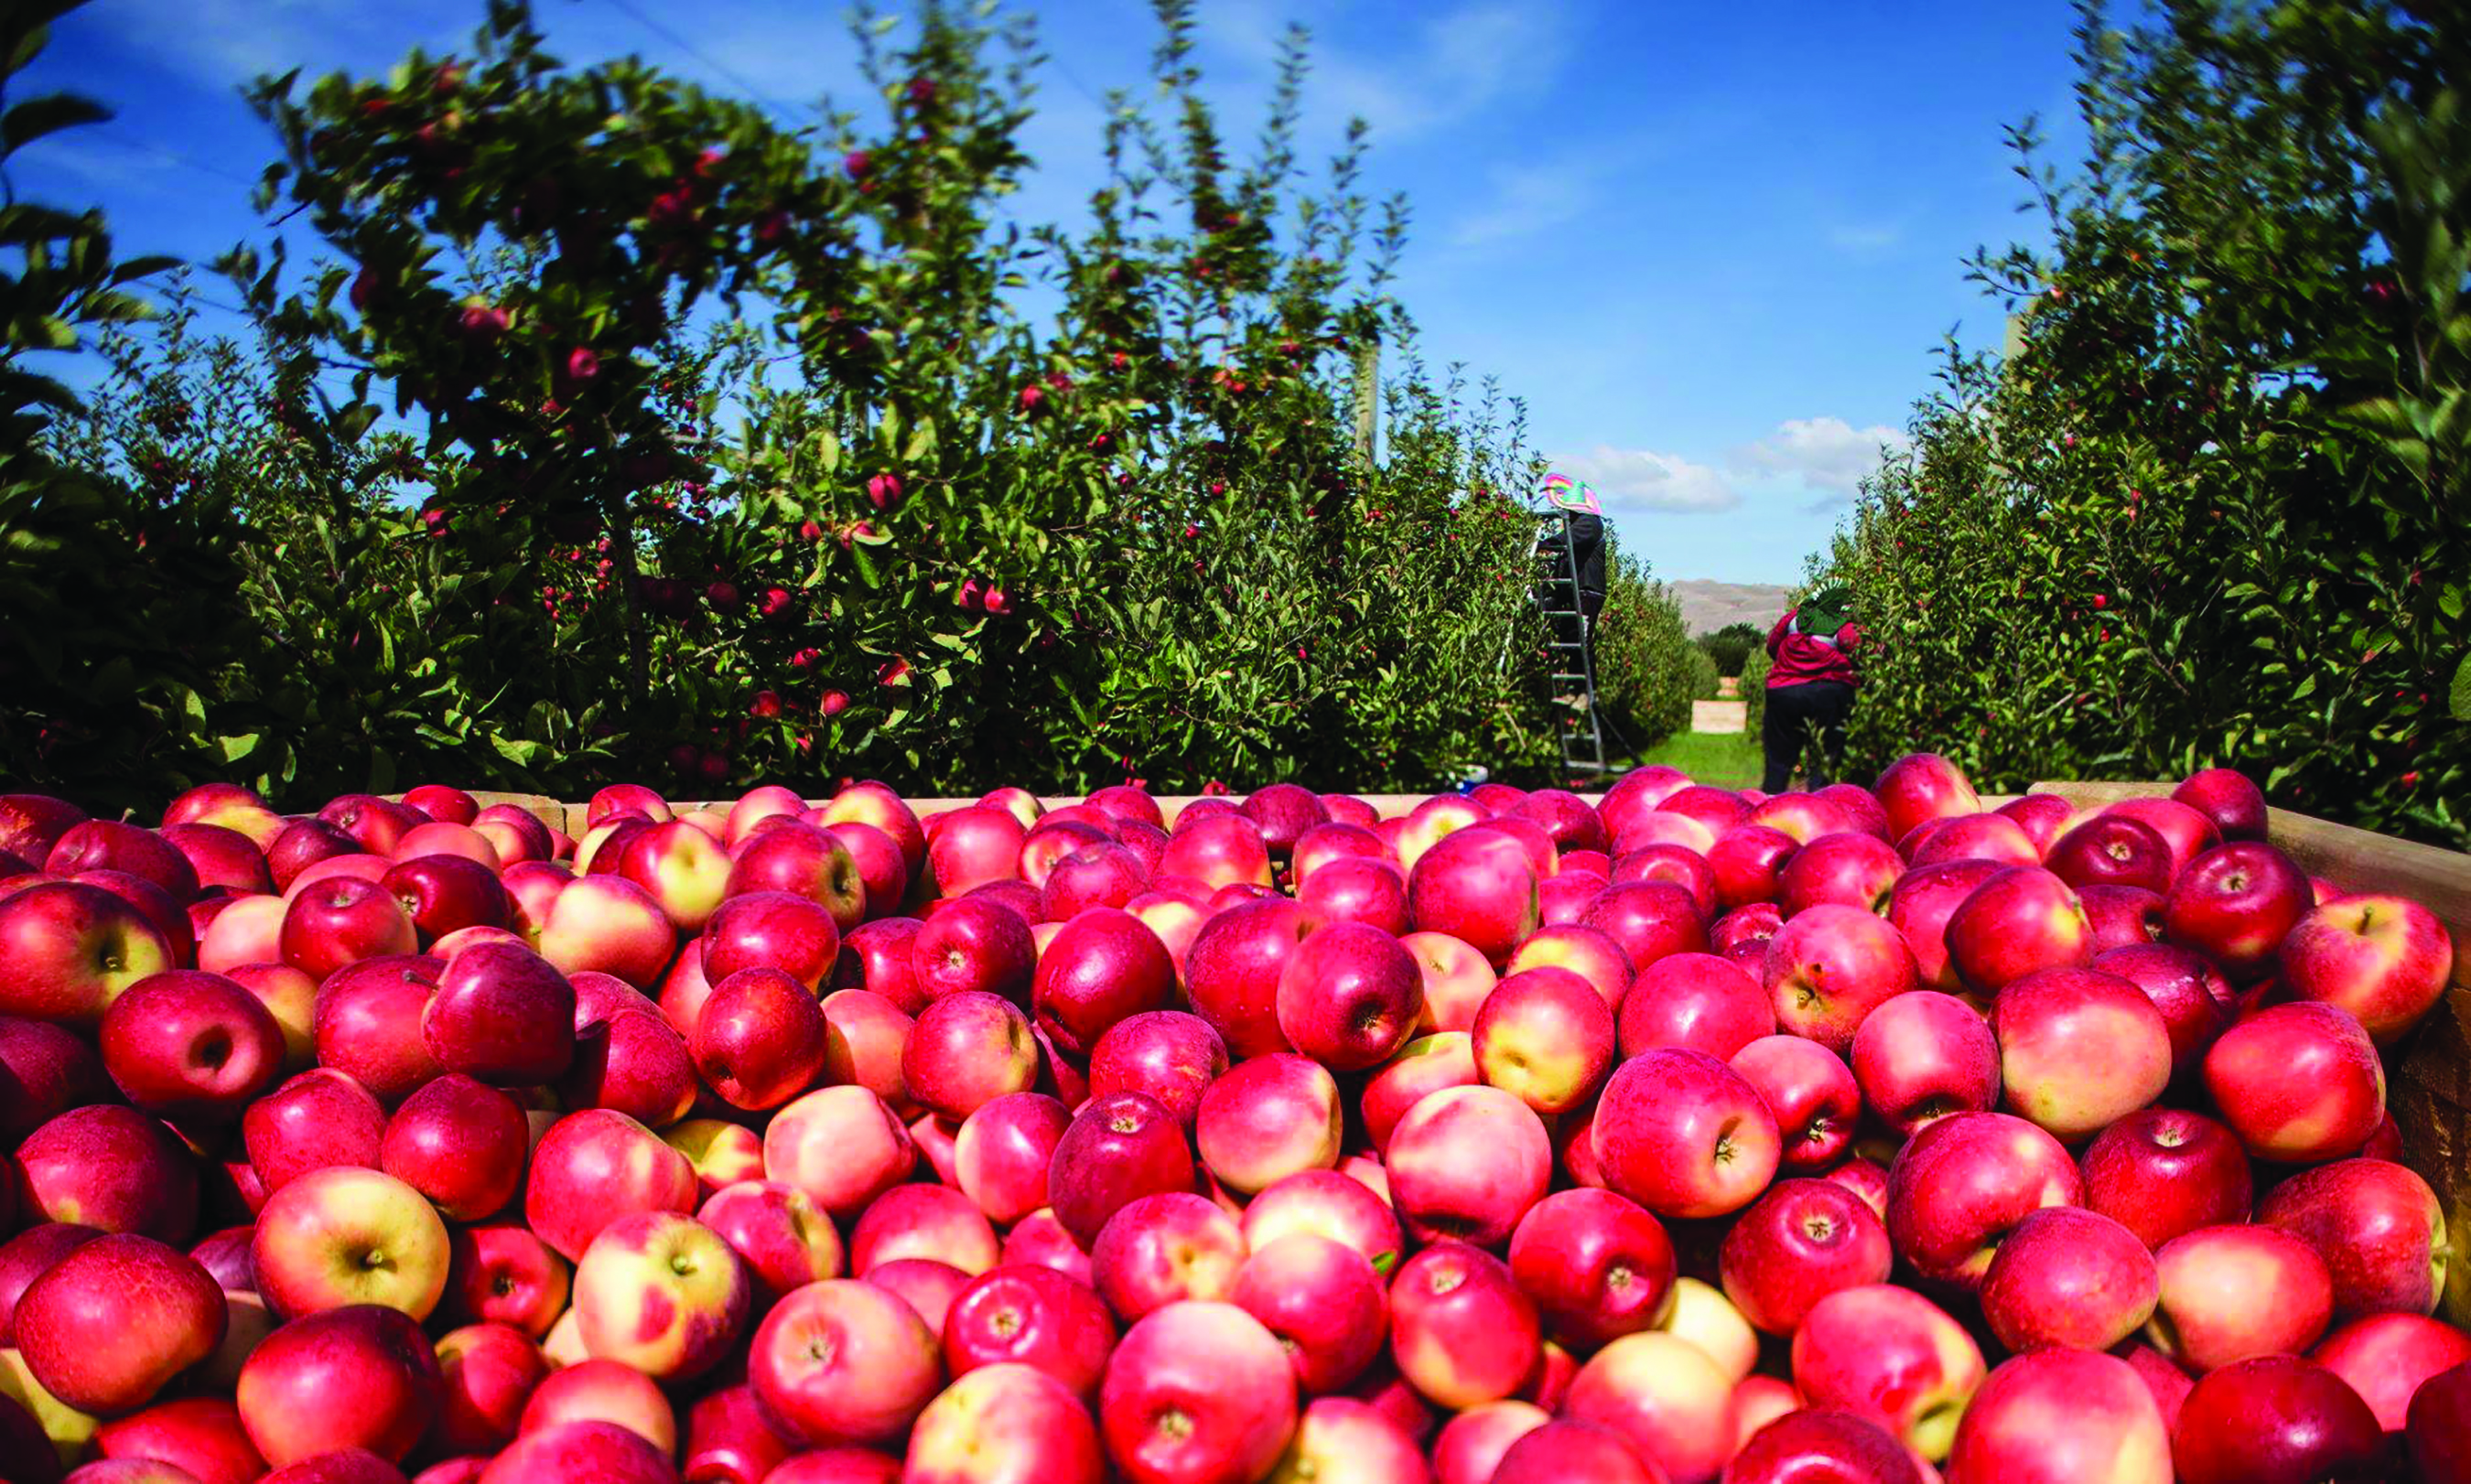 Rockit sets pace in global snack market - Fruit Growers News